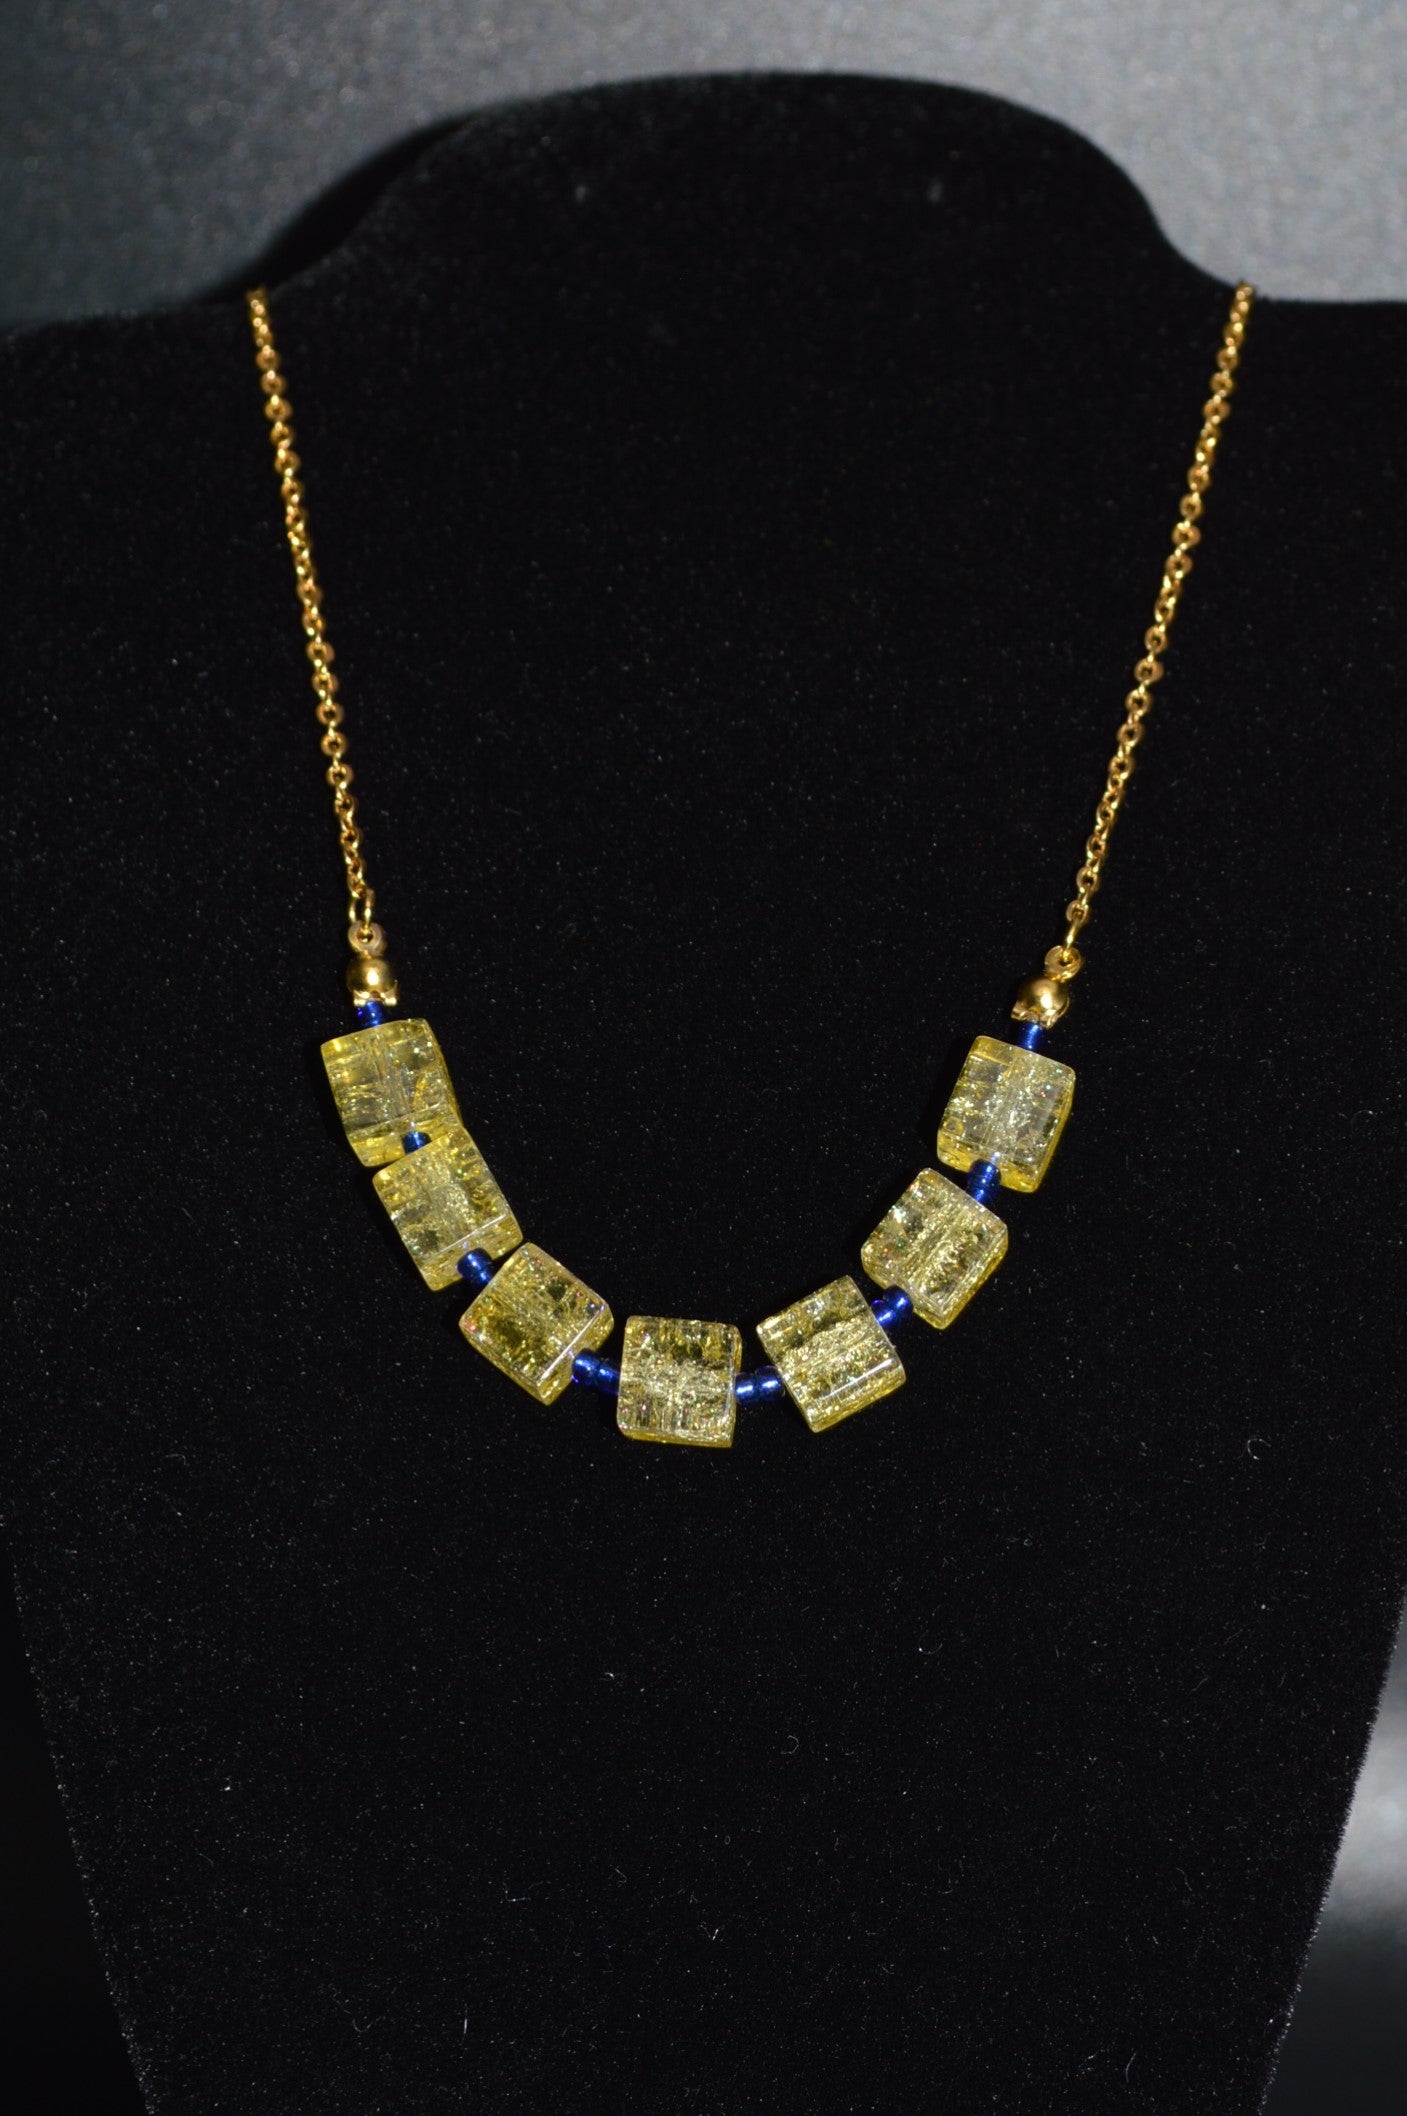 Yellow Crackled Glass Necklace with Blue Seed Beads